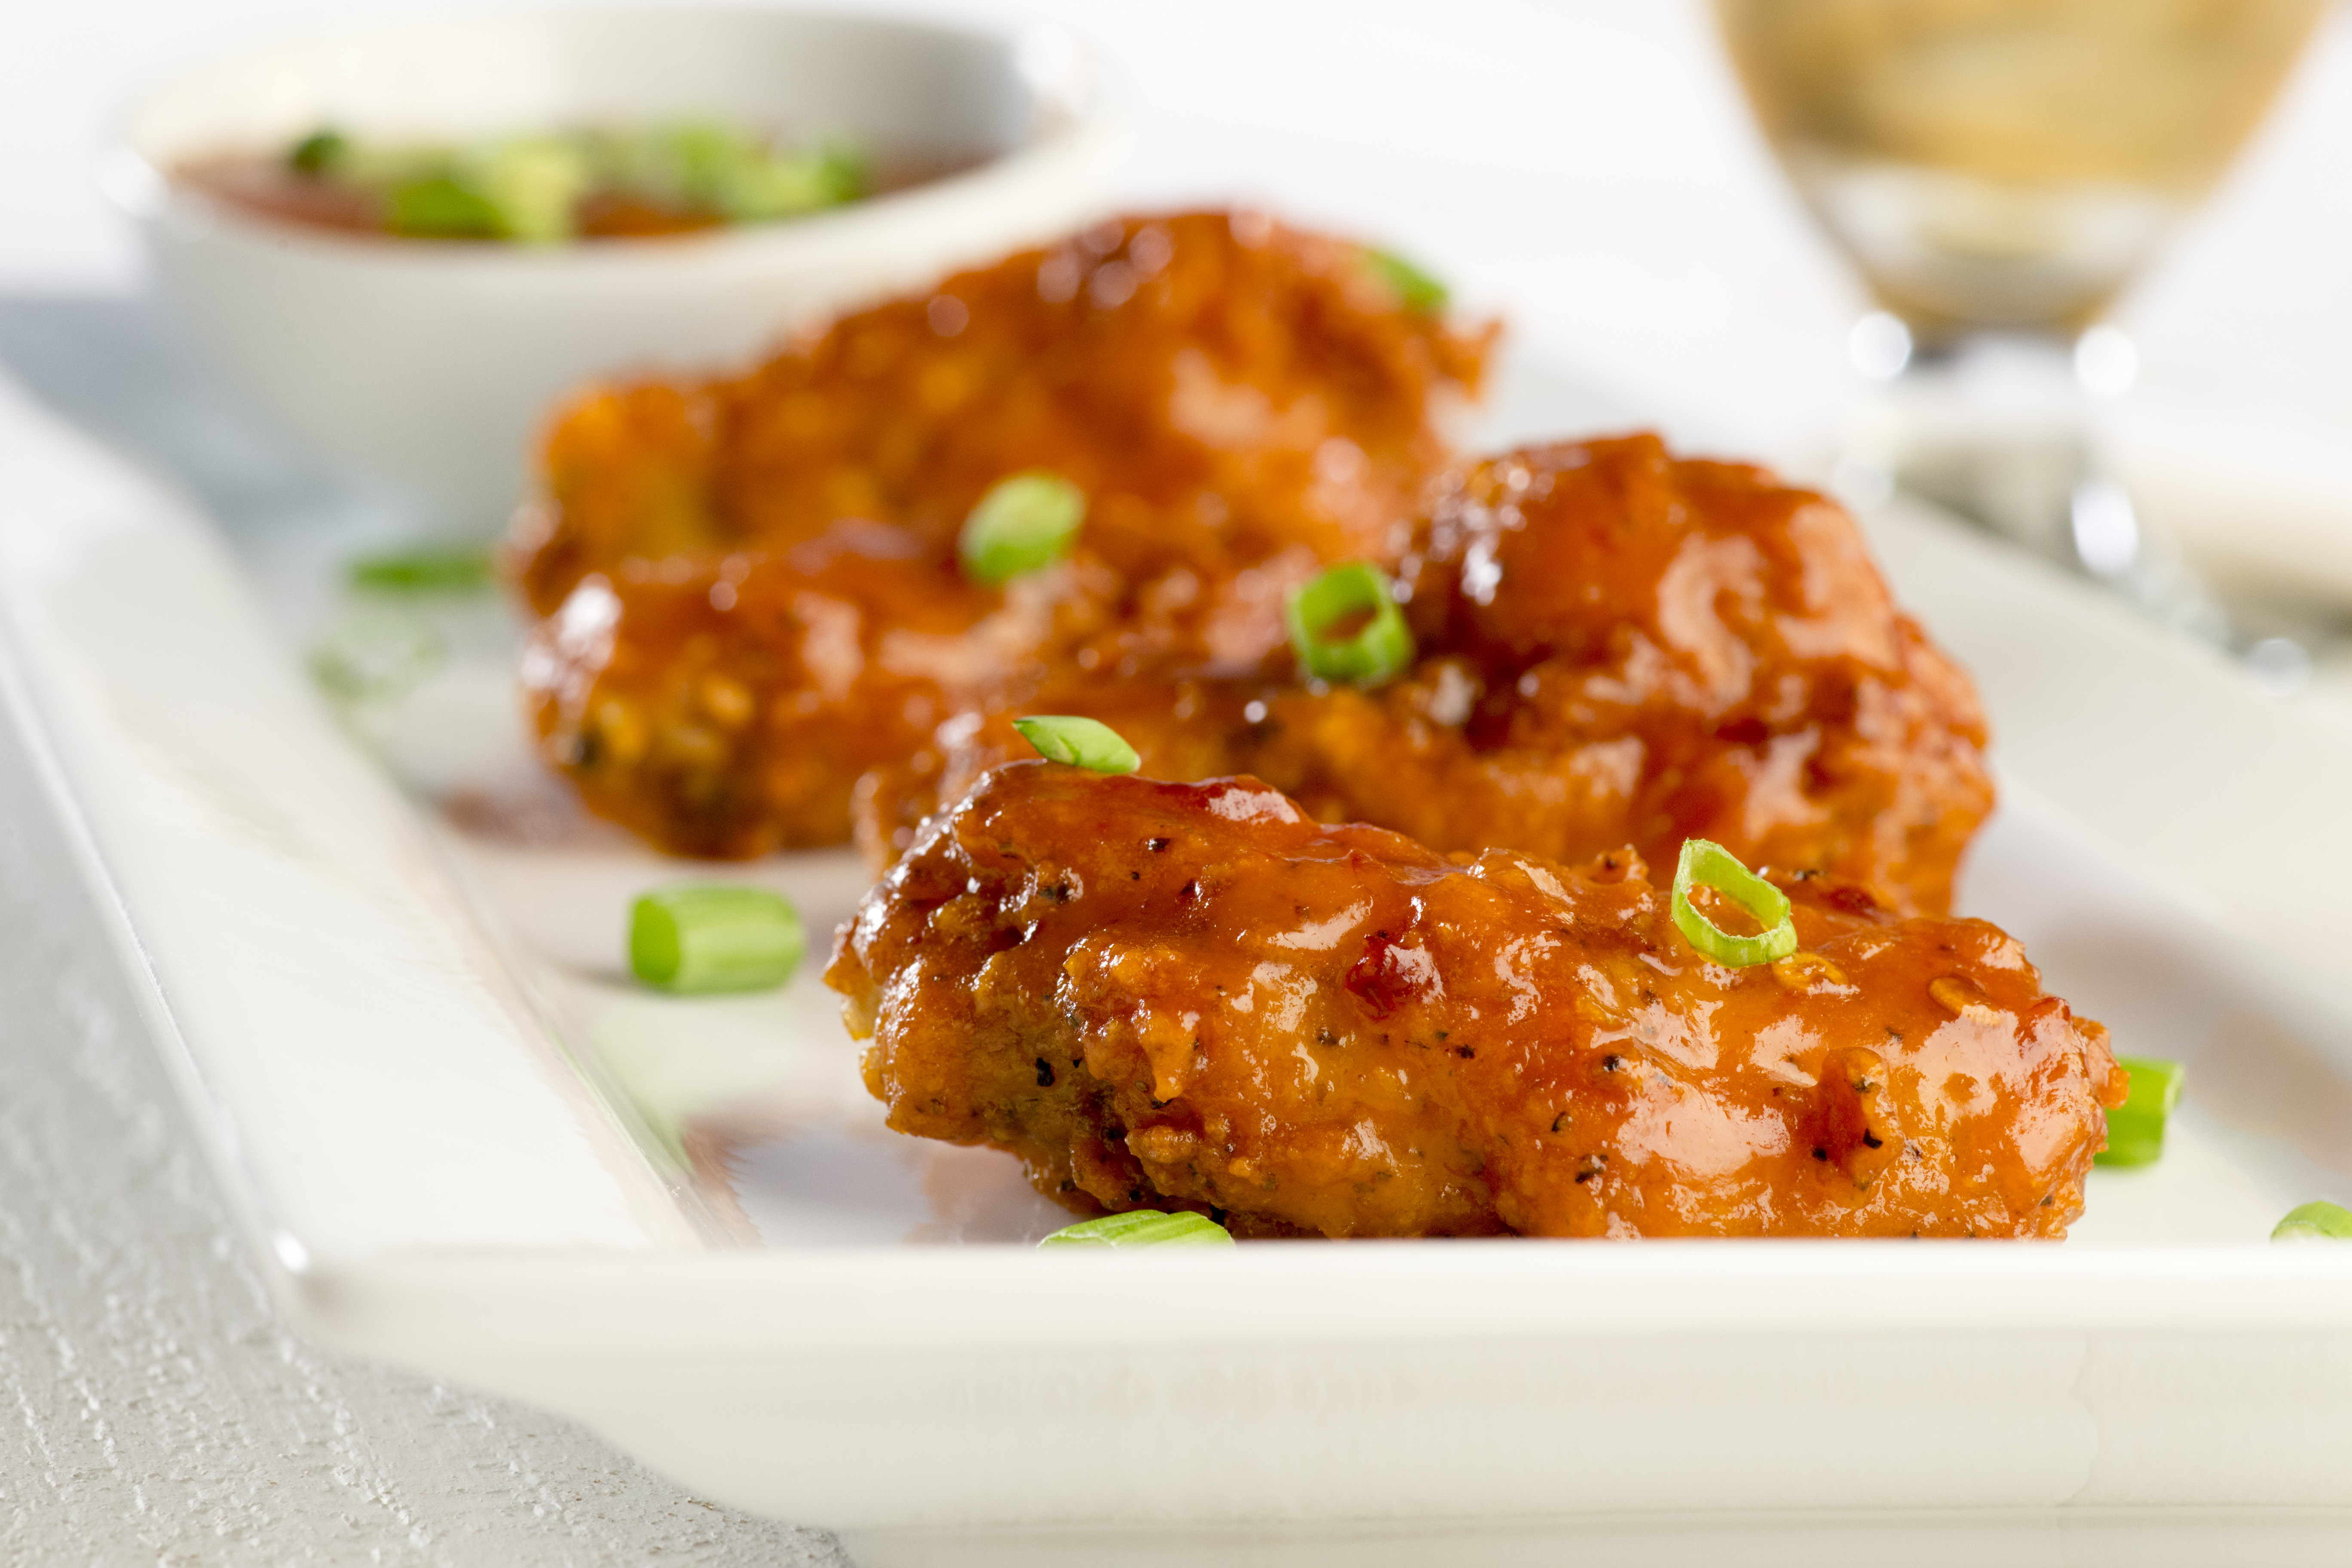 These craveable smoky-sweet wings combine the flavor of rich maple syrup and smoky-hot chipotle chilies in fiery adobo sauce to our favorite hot wings recipe.